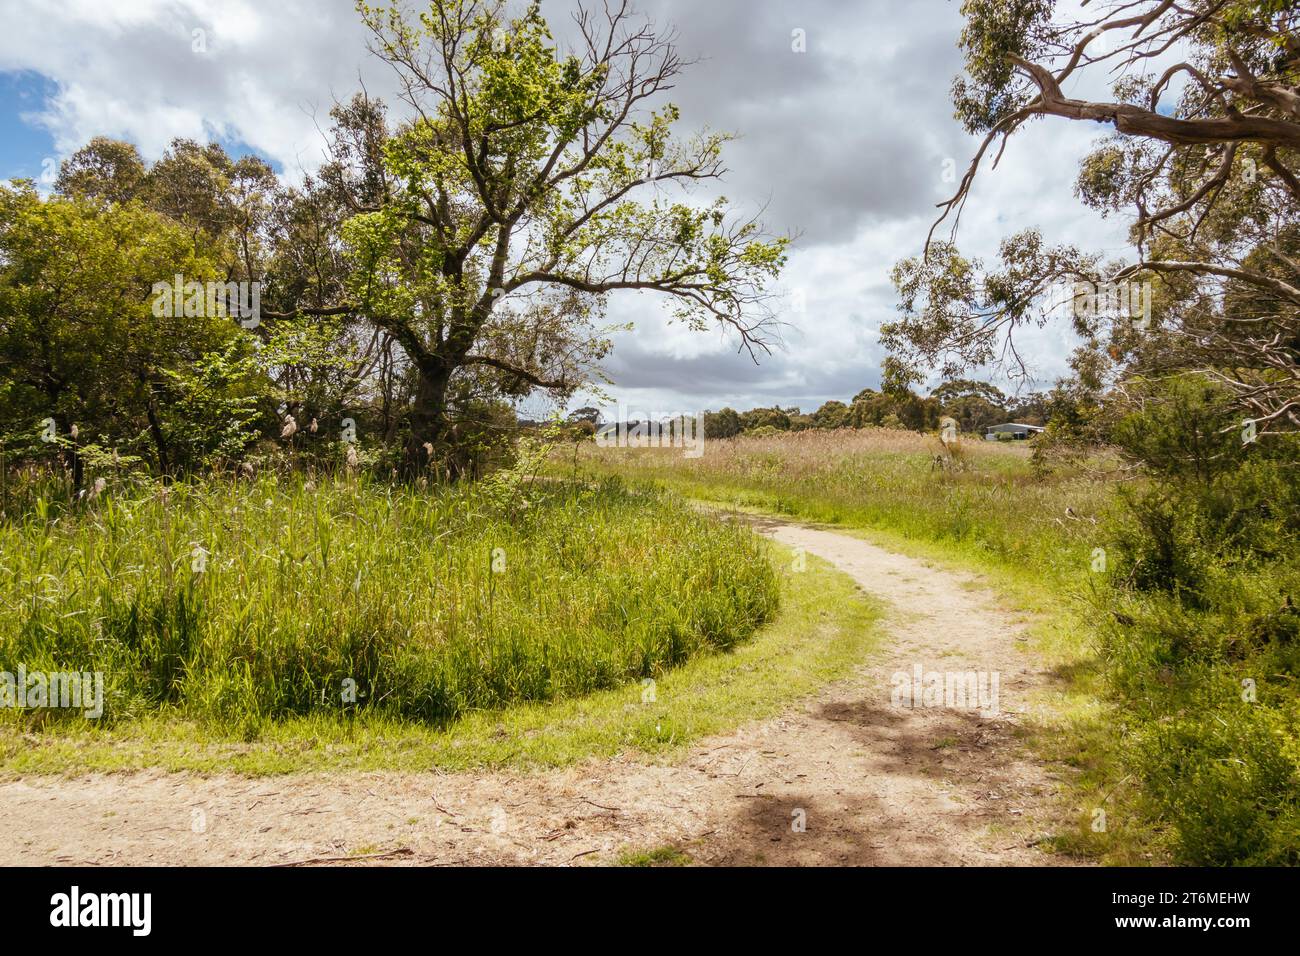 Coolart Wetlands and Homestead in Somers on a hot spring day on the Mornington Peninsula, Victoria, Australia Stock Photo